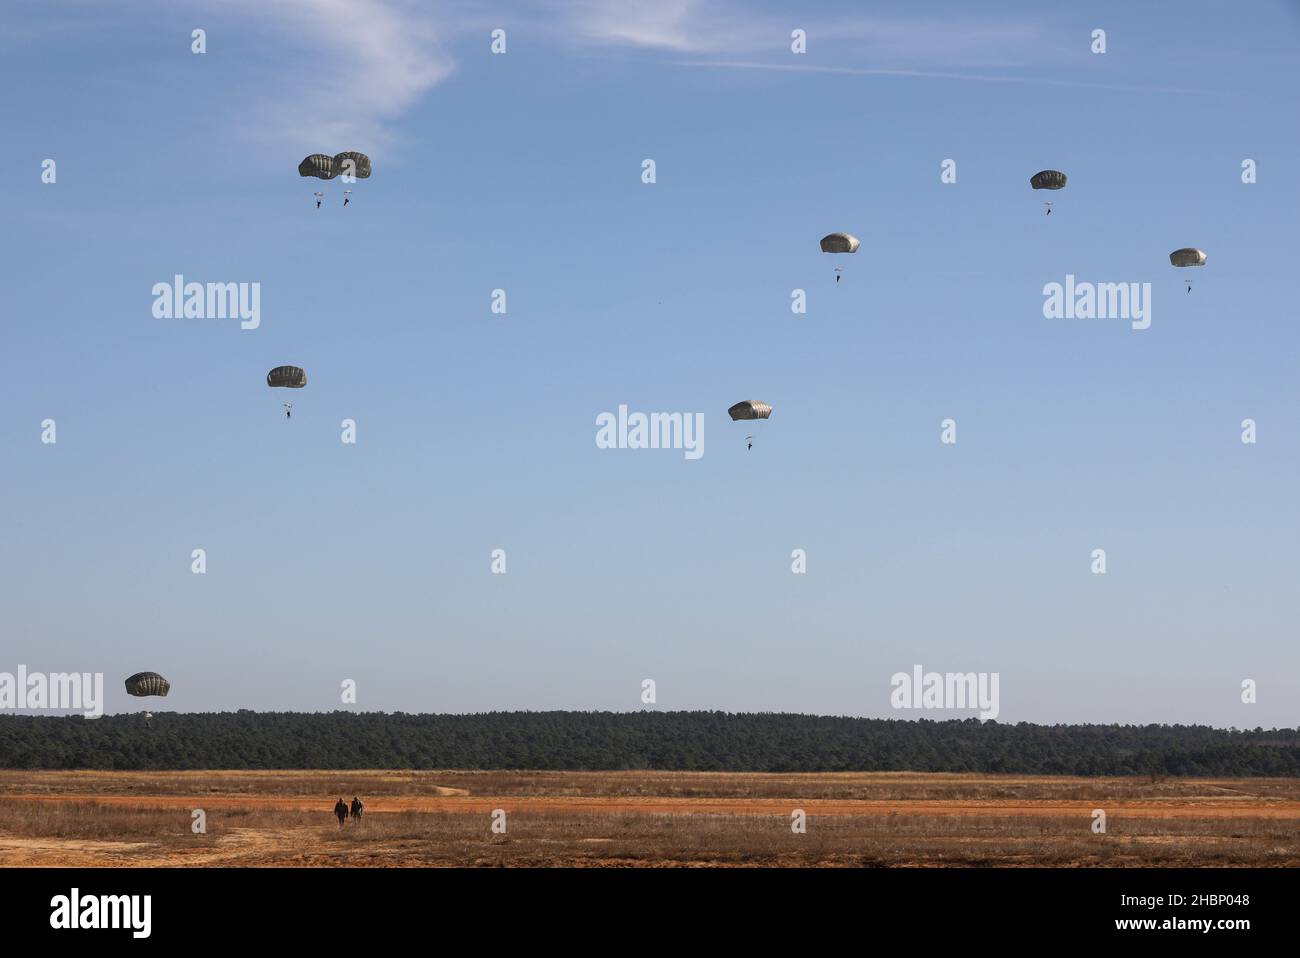 U.S. Army paratroopers assigned to the 82nd Airborne Division descend from a CH-47 Chinook (not in picture) during an airborne exercise at Sicily drop zone, Fort Bragg, North Carolina, Dec. 15, 2021. The U.S. Army Reserve’s U.S. Army Civil Affairs and Psychological Operations Command (Airborne) and 824th Quartermaster Company partnered with Soldiers from the 82nd Airborne Division to conduct a non-tactical airborne operation with allied jump master in order to maintain proficiency and earn foreign jump wings, Dec. 13-15, 2021. (U.S. Army photo by Spc. Cody Rich) Stock Photo